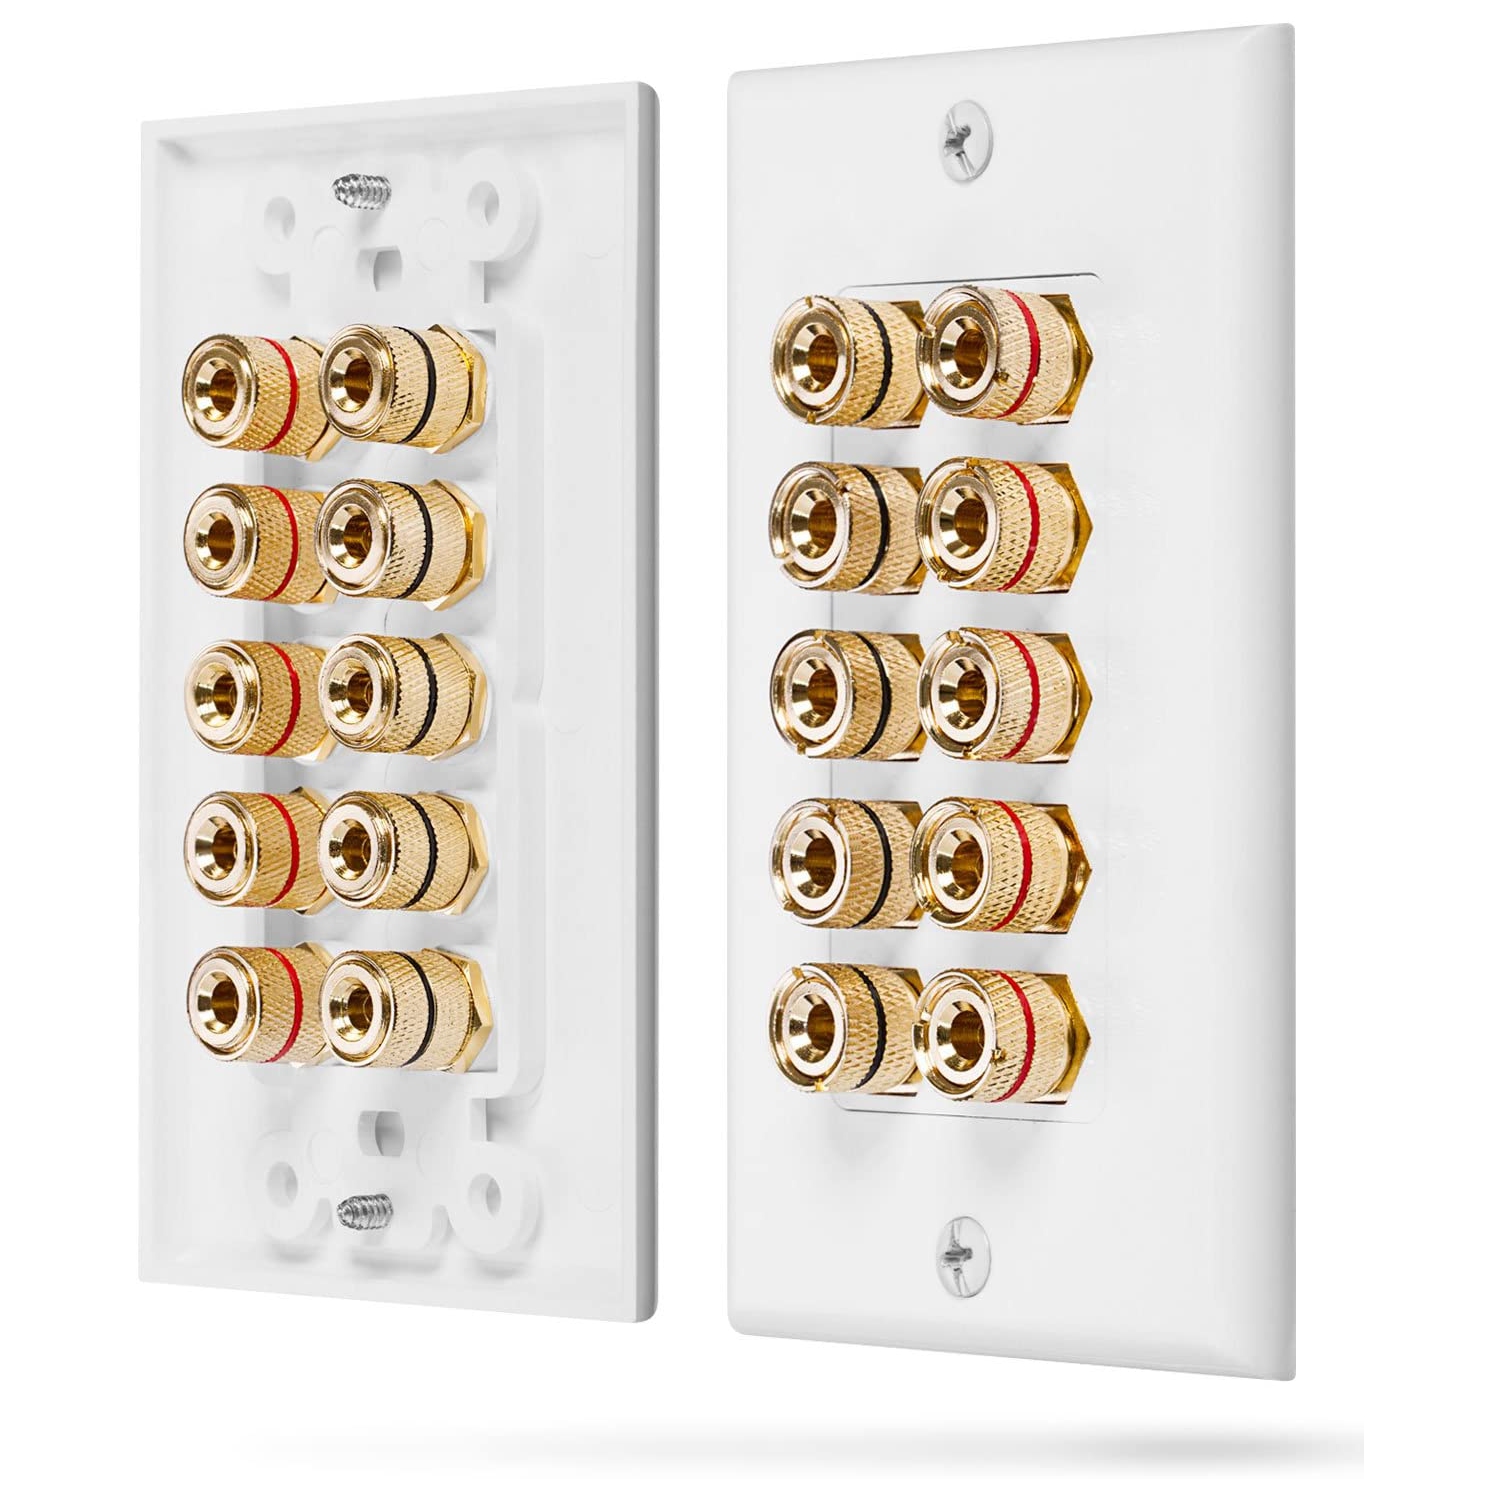 [Five Speaker] Home Theater Wall Plate - Premium Quality Gold Plated CopCooper Banana Binding Post Coupler Type